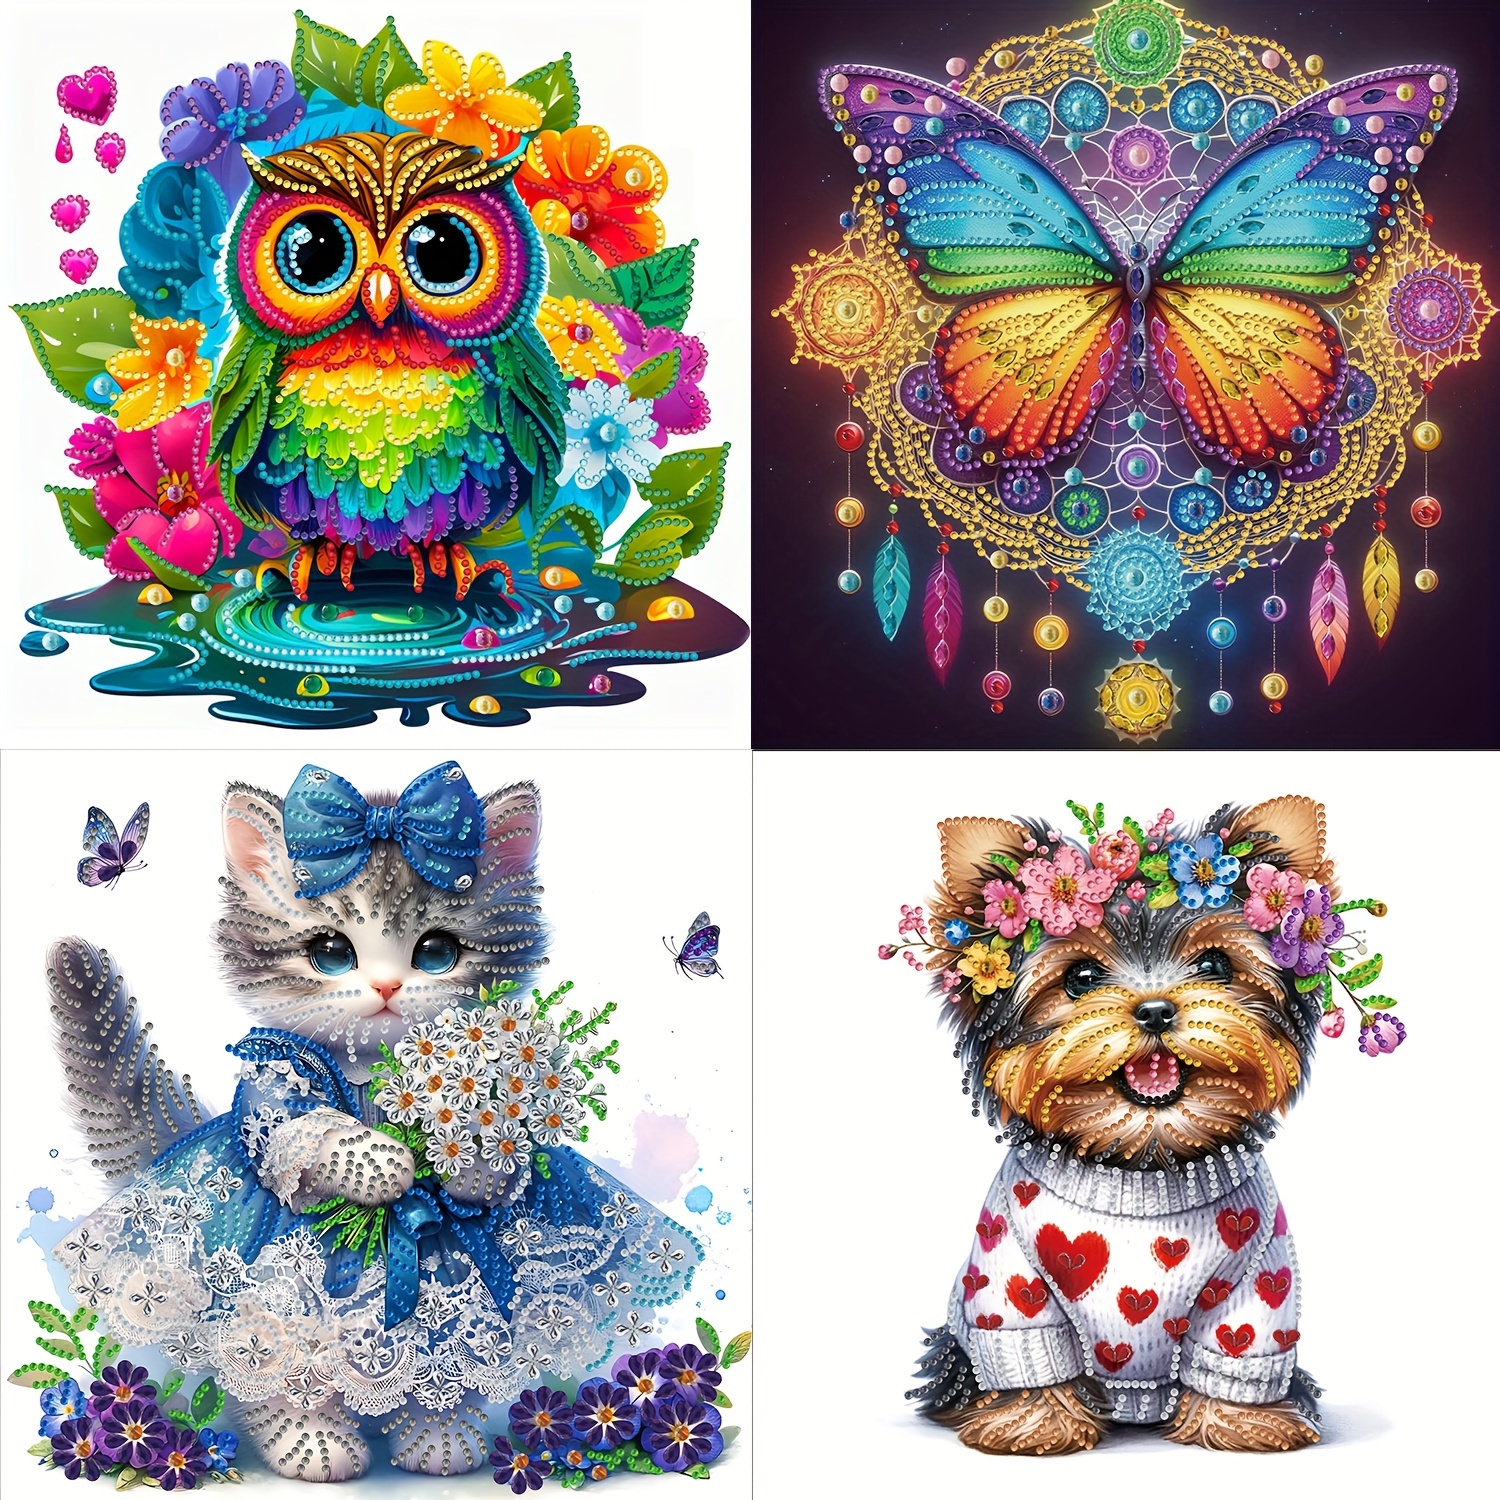 

5d Diamond Painting Kit - Sparkling Cartoon Owl, Cat & Butterfly Designs With Special Shaped Rhinestones - Diy Acrylic Diamond Art For Home Wall Decor - Perfect Gift For Friends